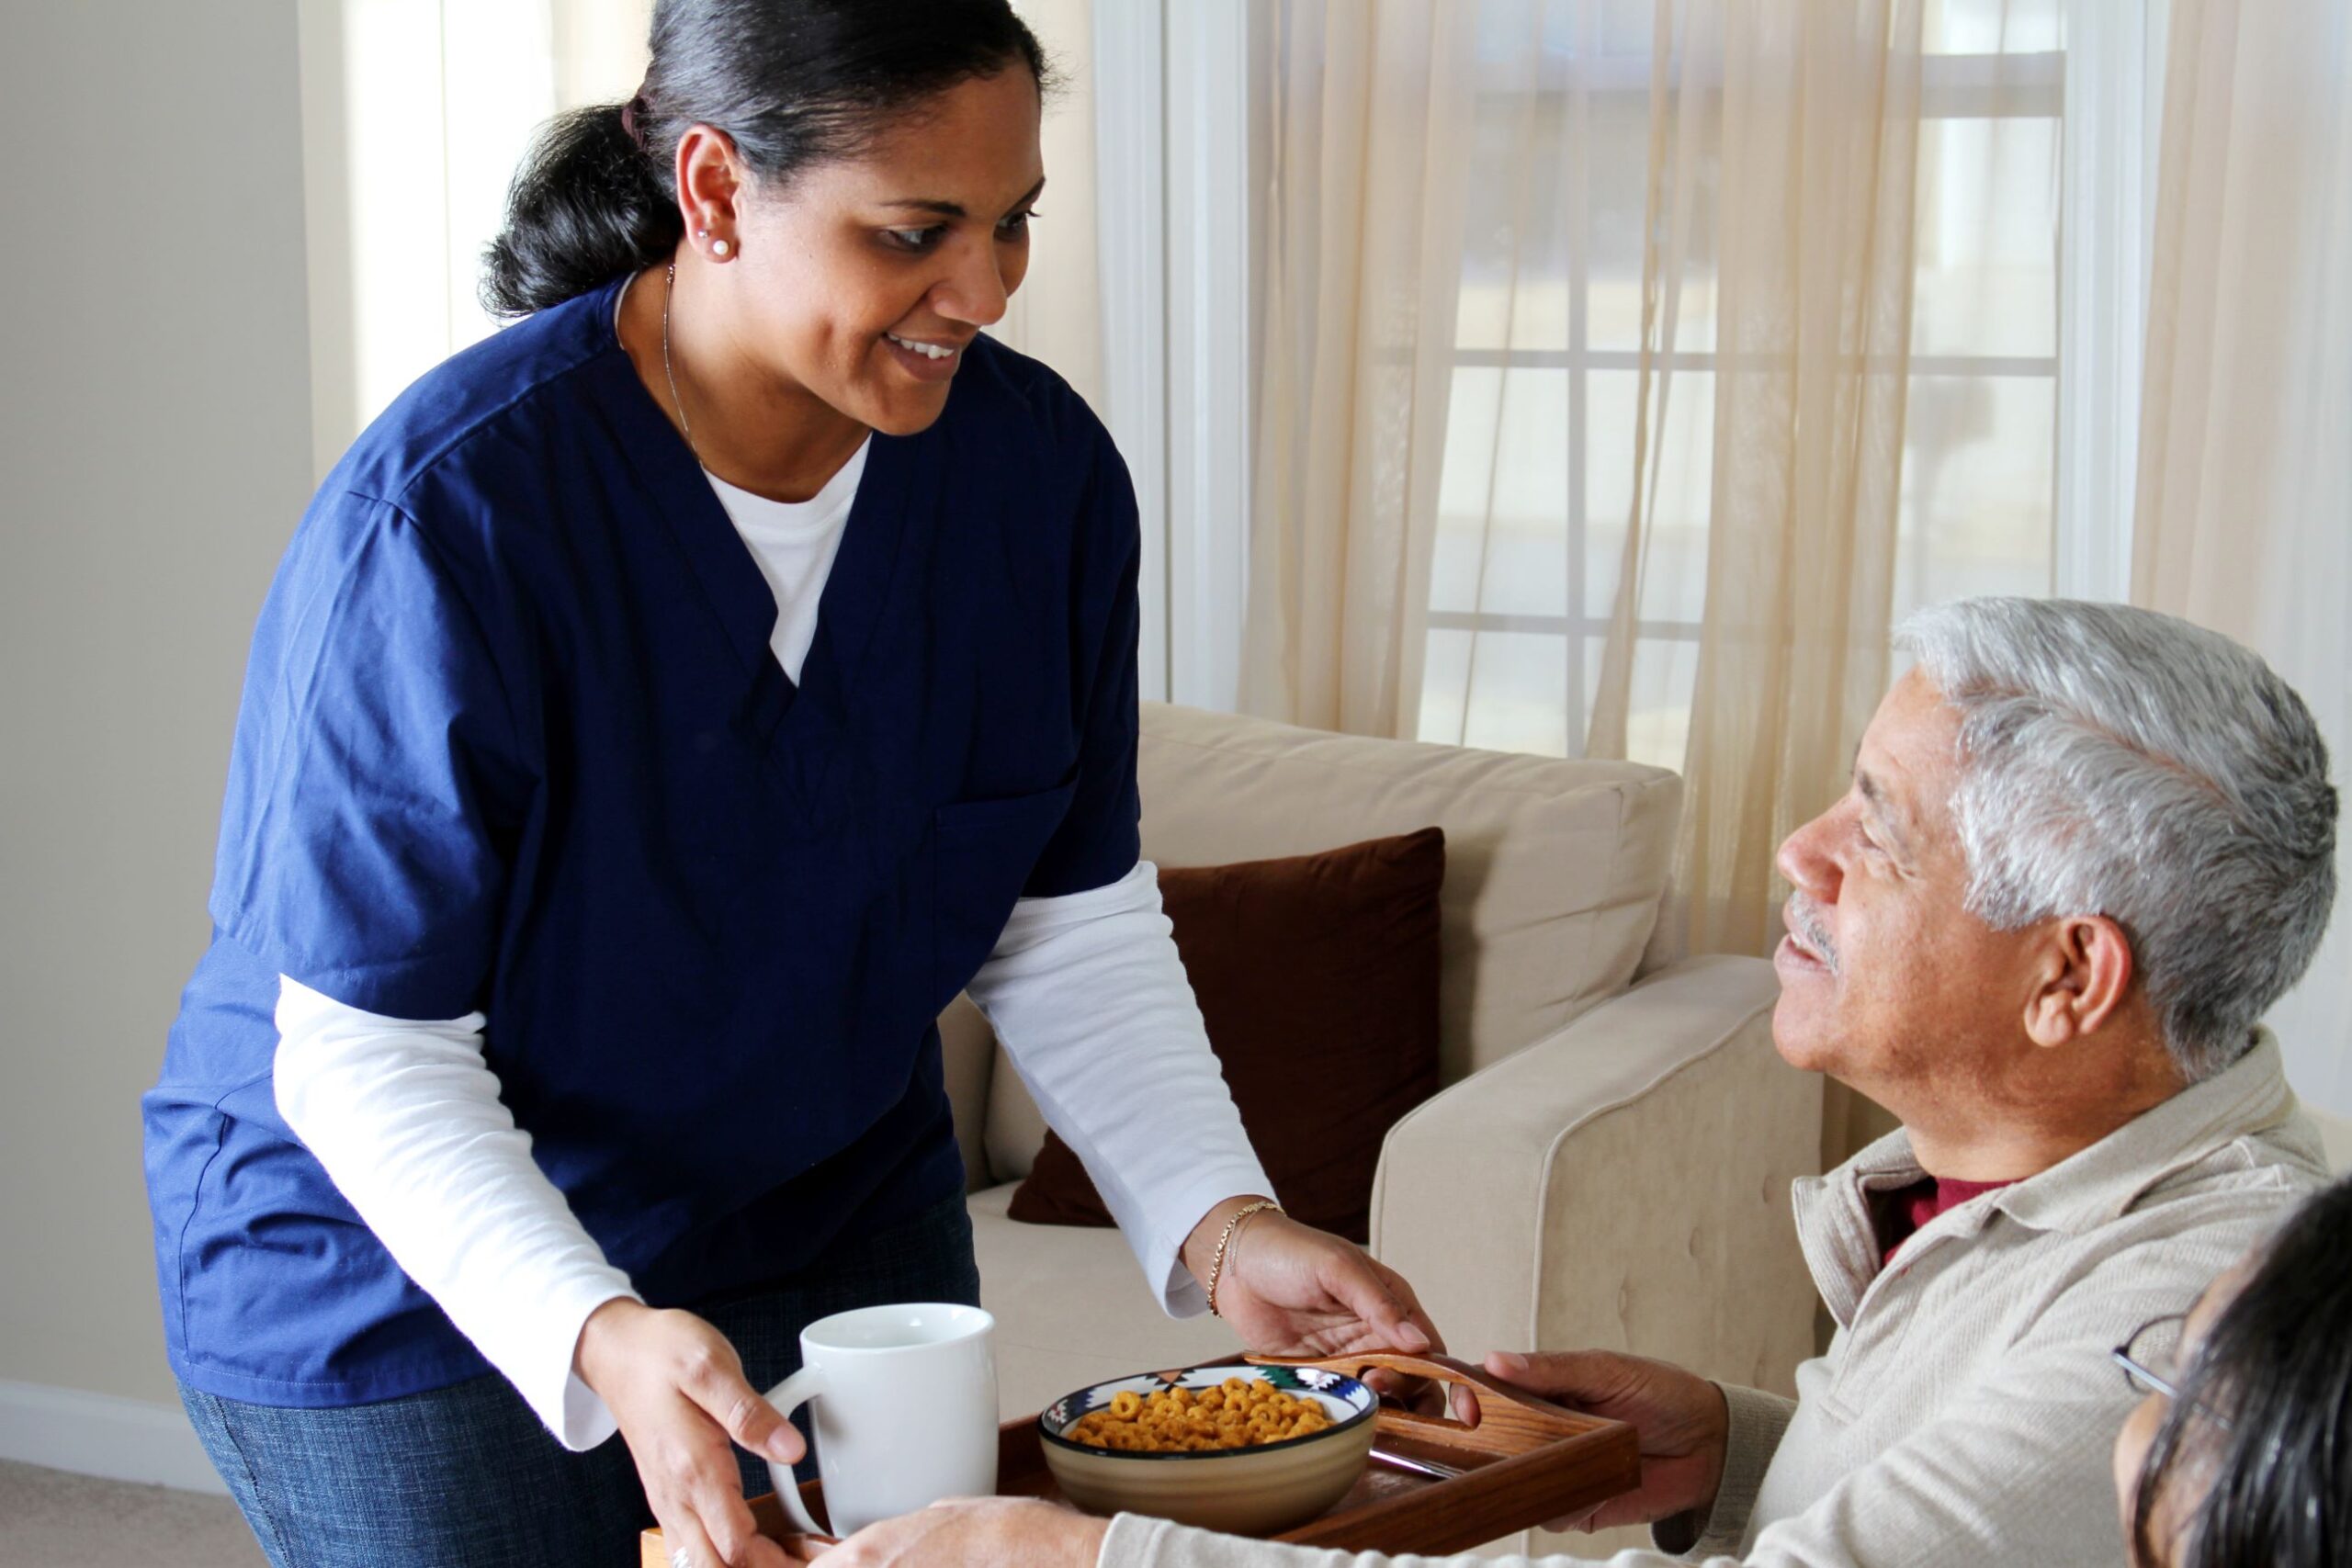 Healthcare worker in blue and white scrubs places a food tray with cereal and a white coffee mug in front of an older gentleman with silver hair wearing and ivory colored shirt.